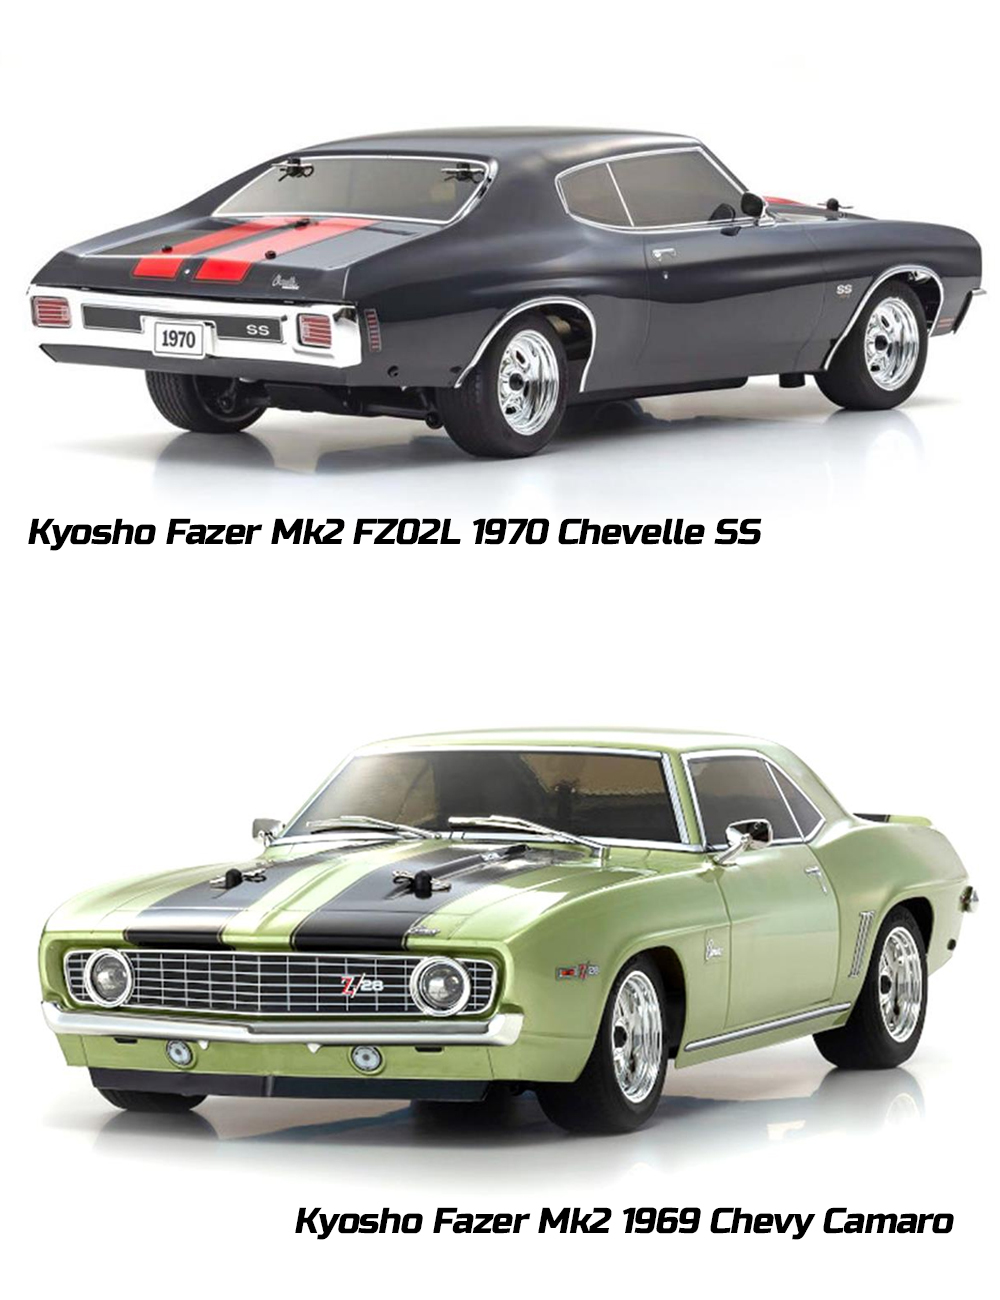 Unboxing the Kyosho 1970 Dodge Charger RC Car